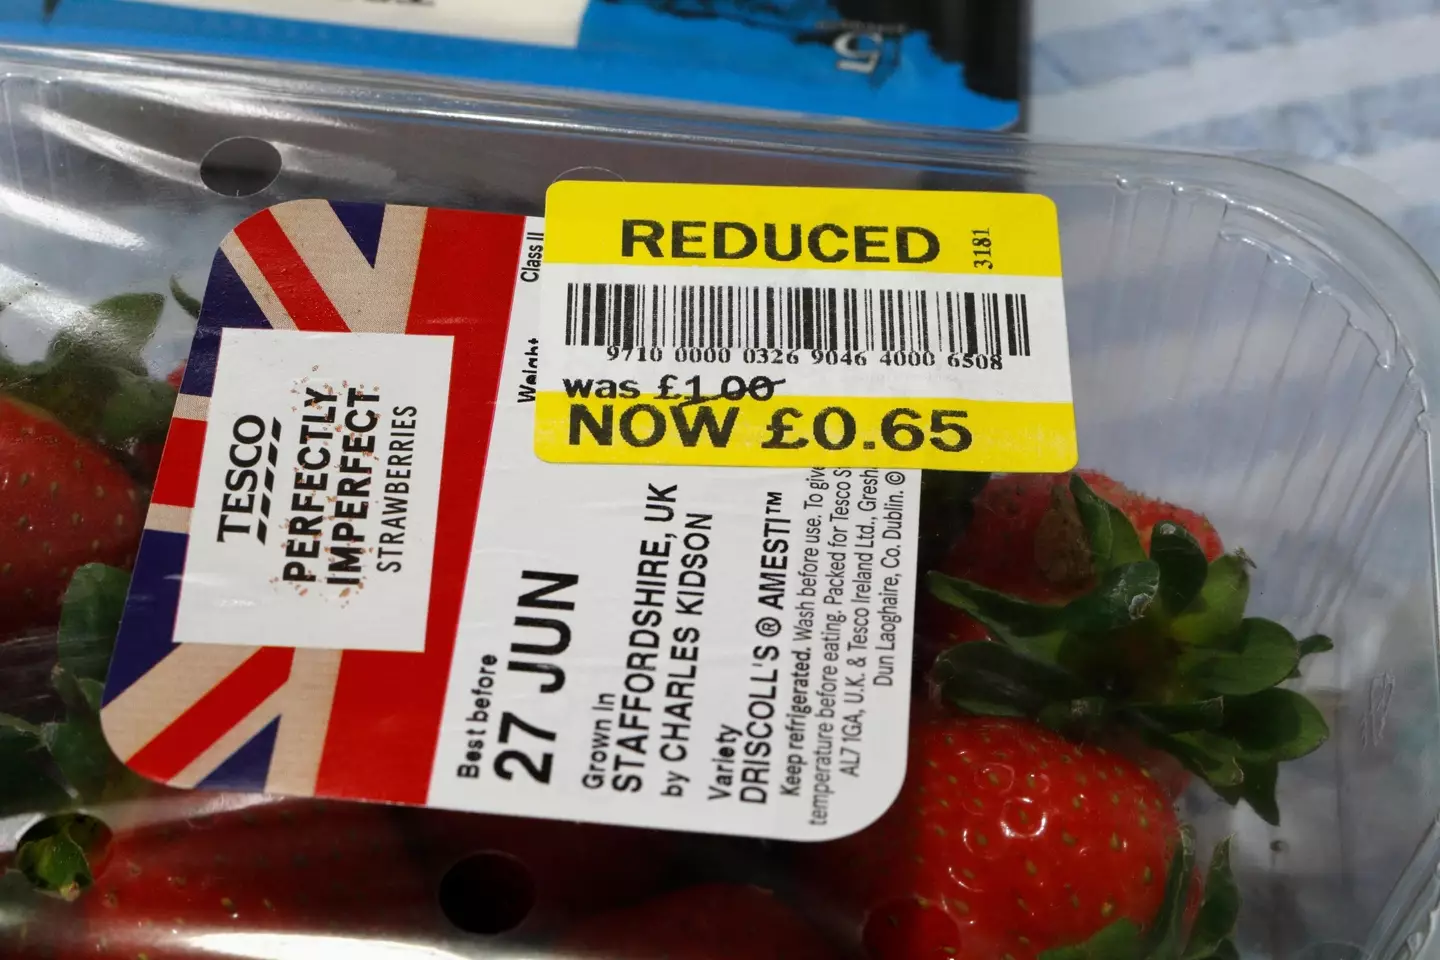 Tesco has revealed it's shaking up its yellow sticker section.